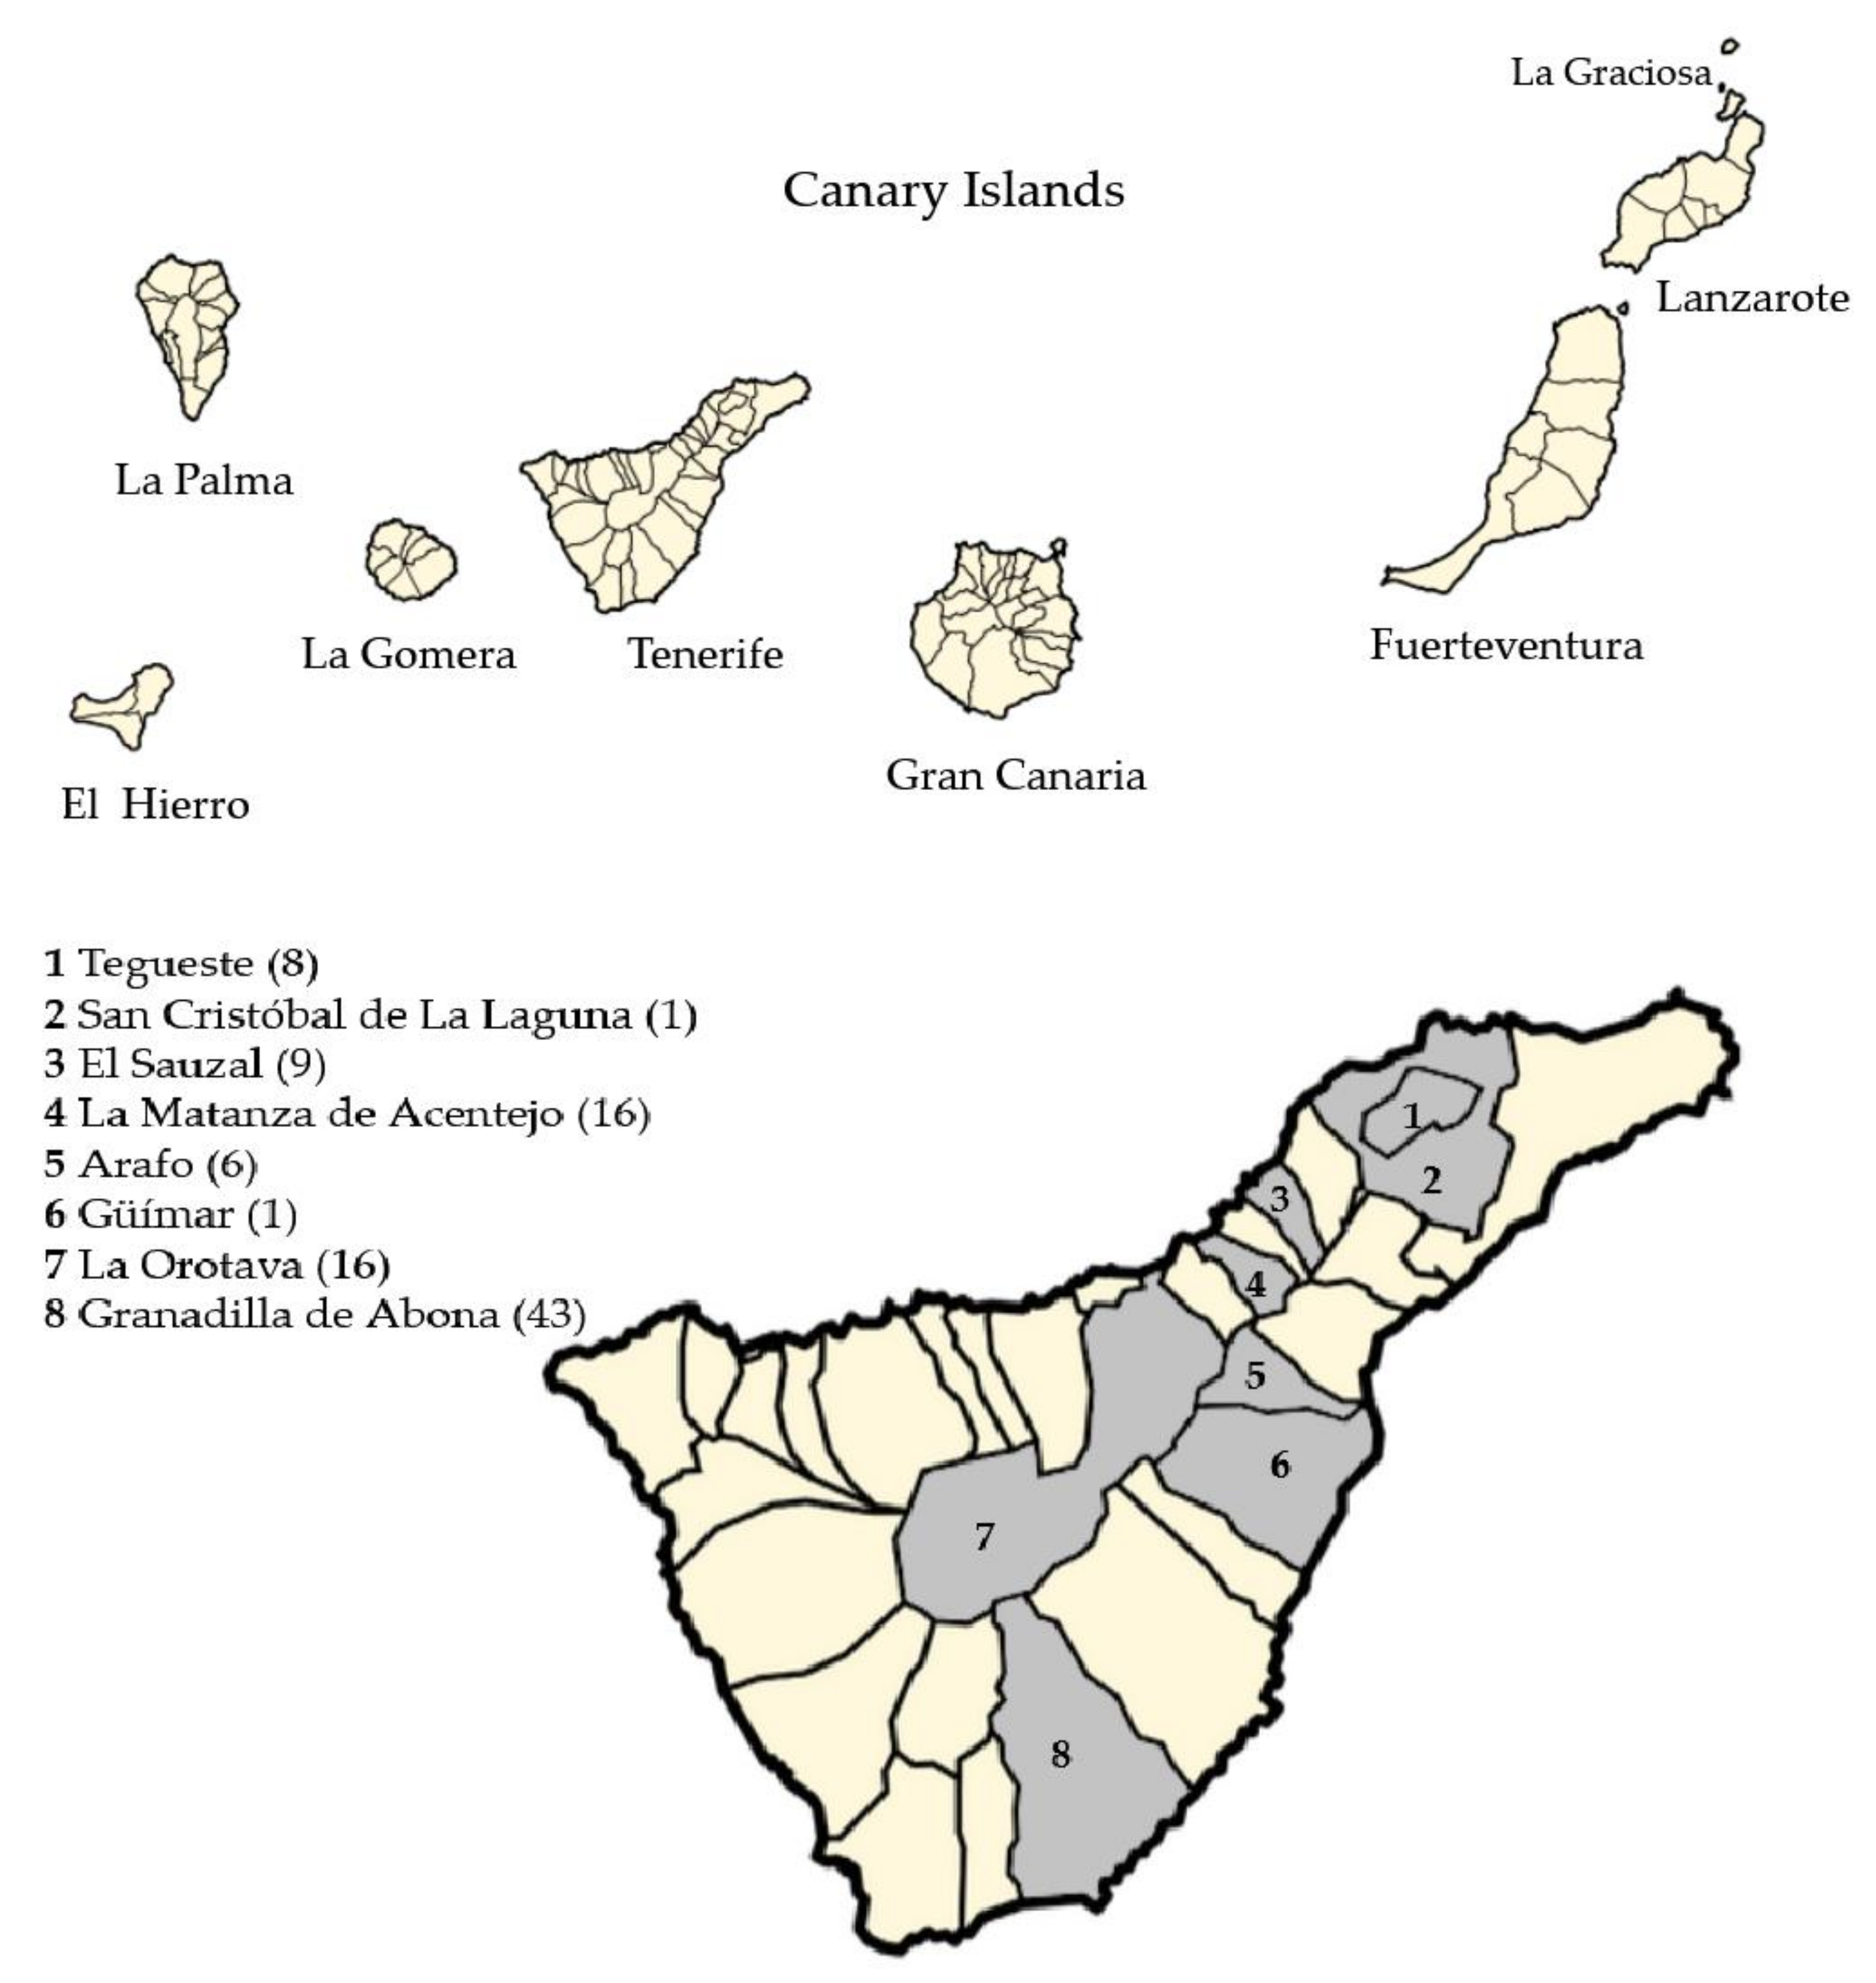 File:Portugal topographic map-es.svg - Wikimedia Commons